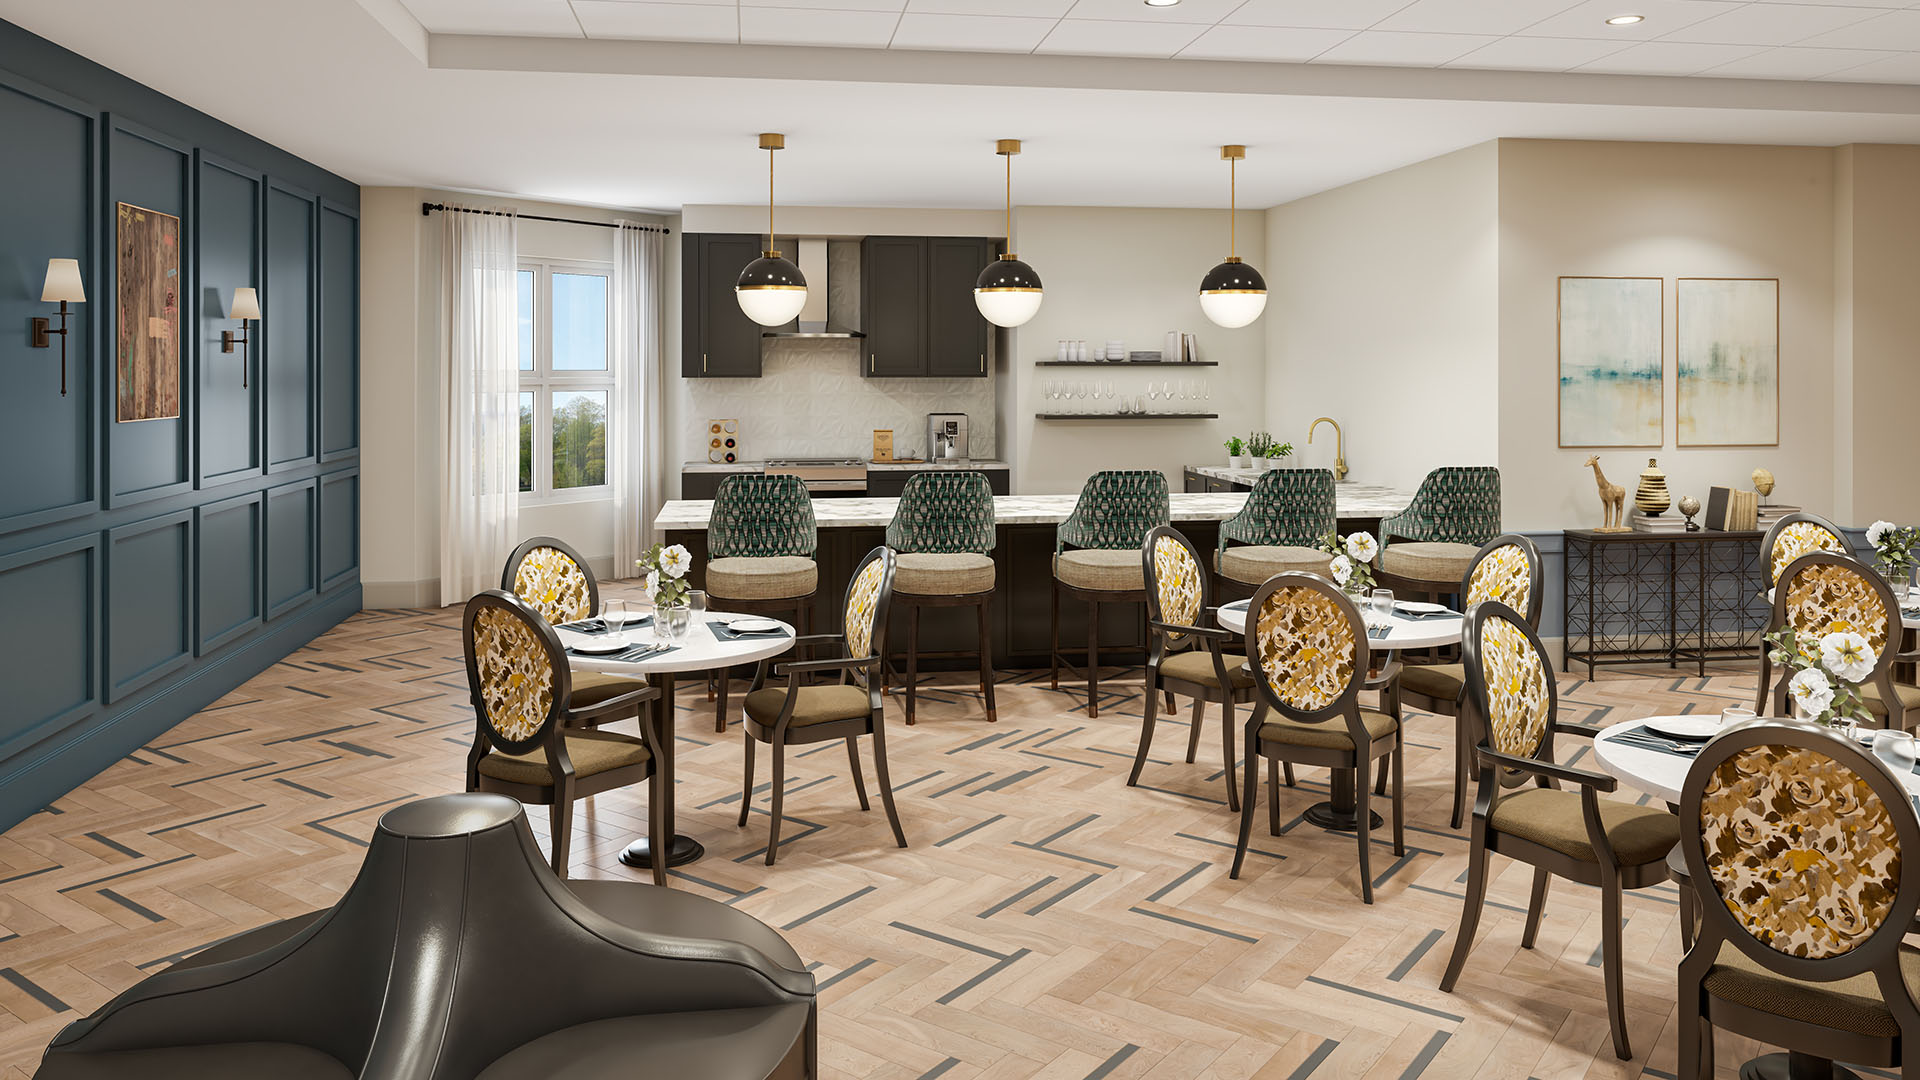 The Residence at Boylston Place Dining